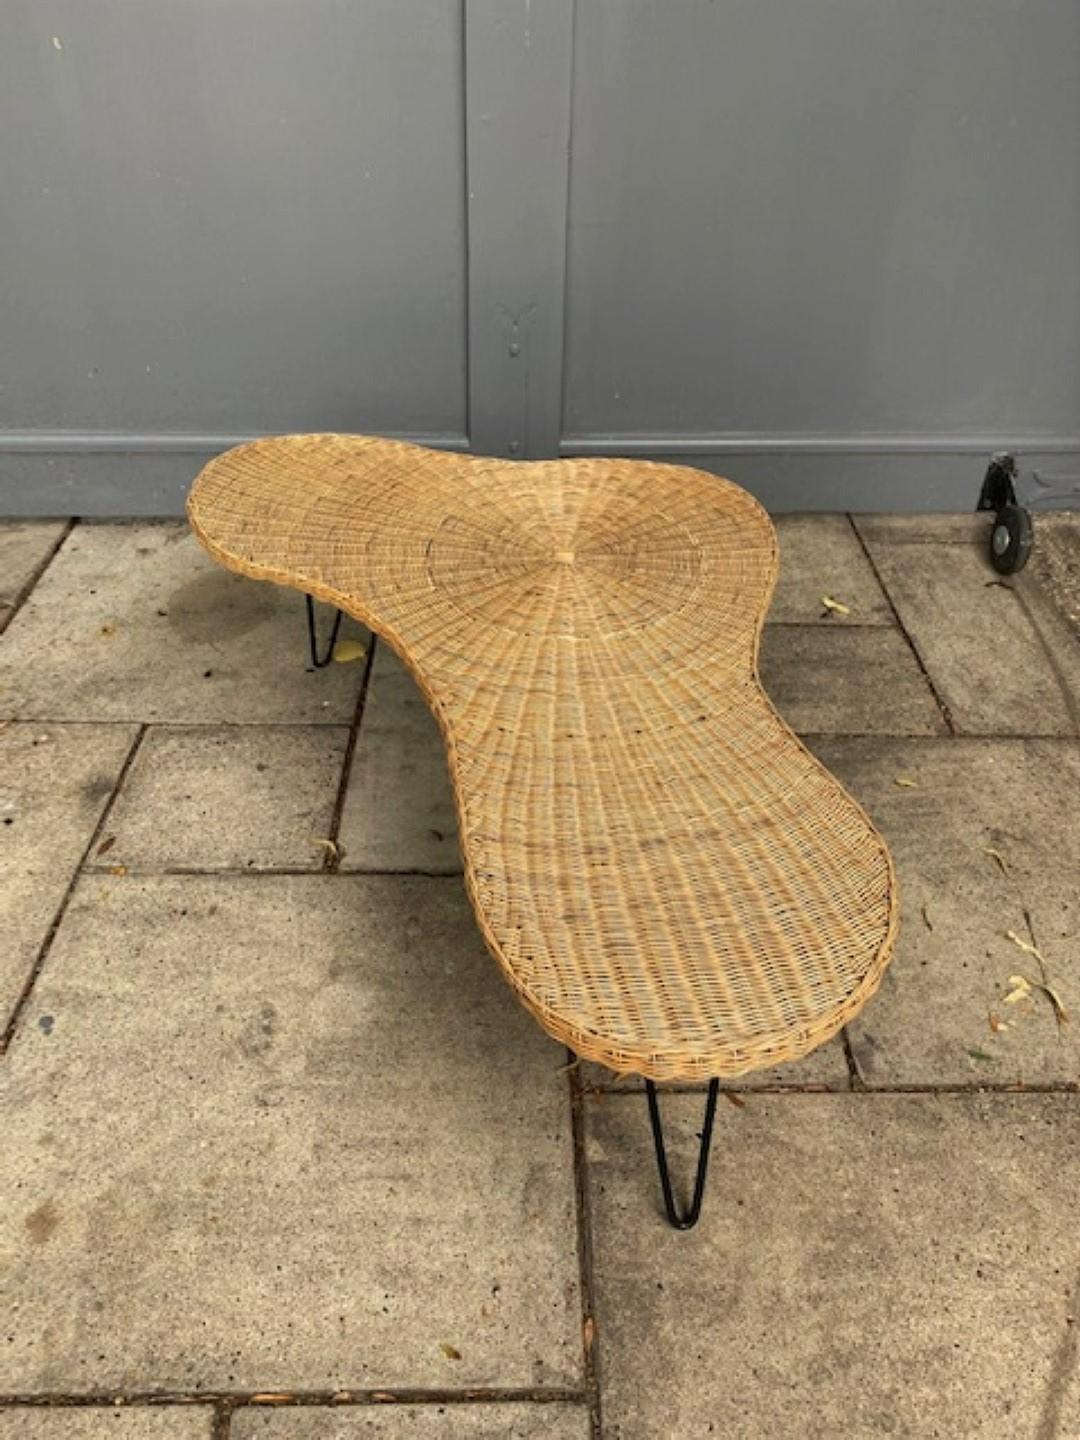 Mid Century Biomorphic Amoeba Wicker & Iron cocktail /coffee table, France, 1950s

Rare Mid Century biomorphic organic shape wicker and iron cocktail / coffee table in rattan wicker over solid wood base and black iron hairpin legs. This piece is in